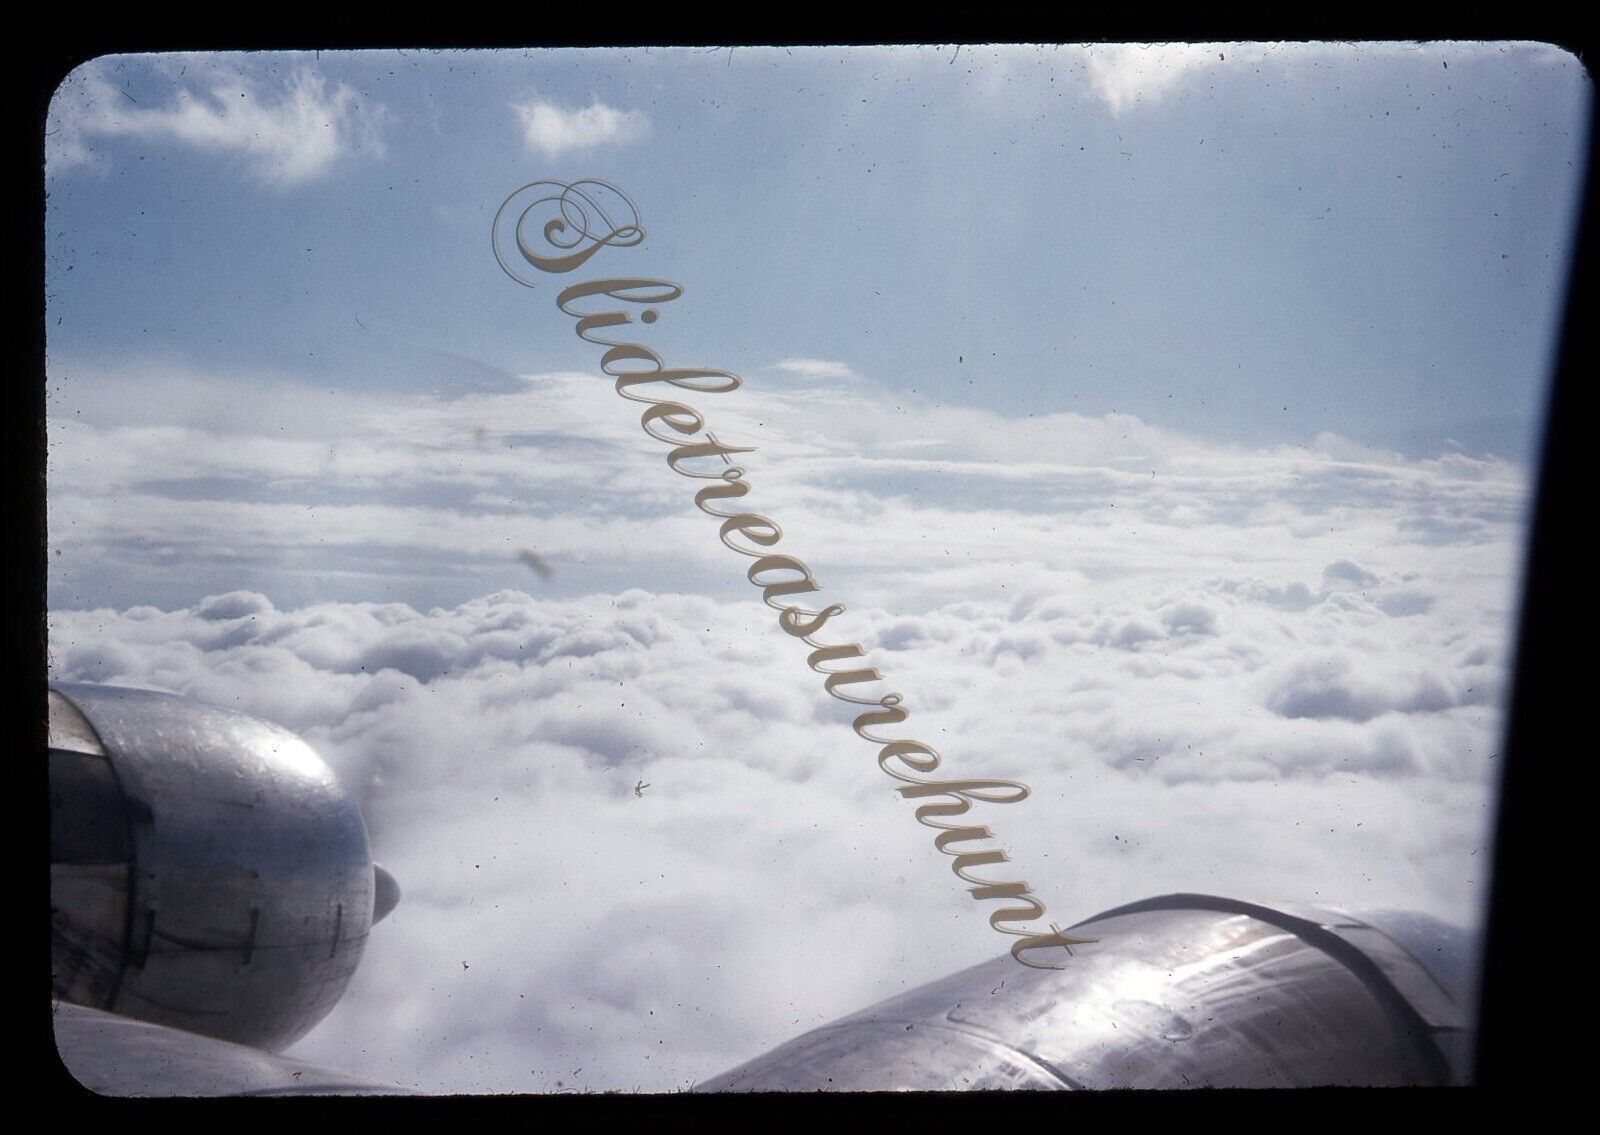 Aircraft Engine Prop Wing 35mm Slide 1950s Red Border Kodachrome